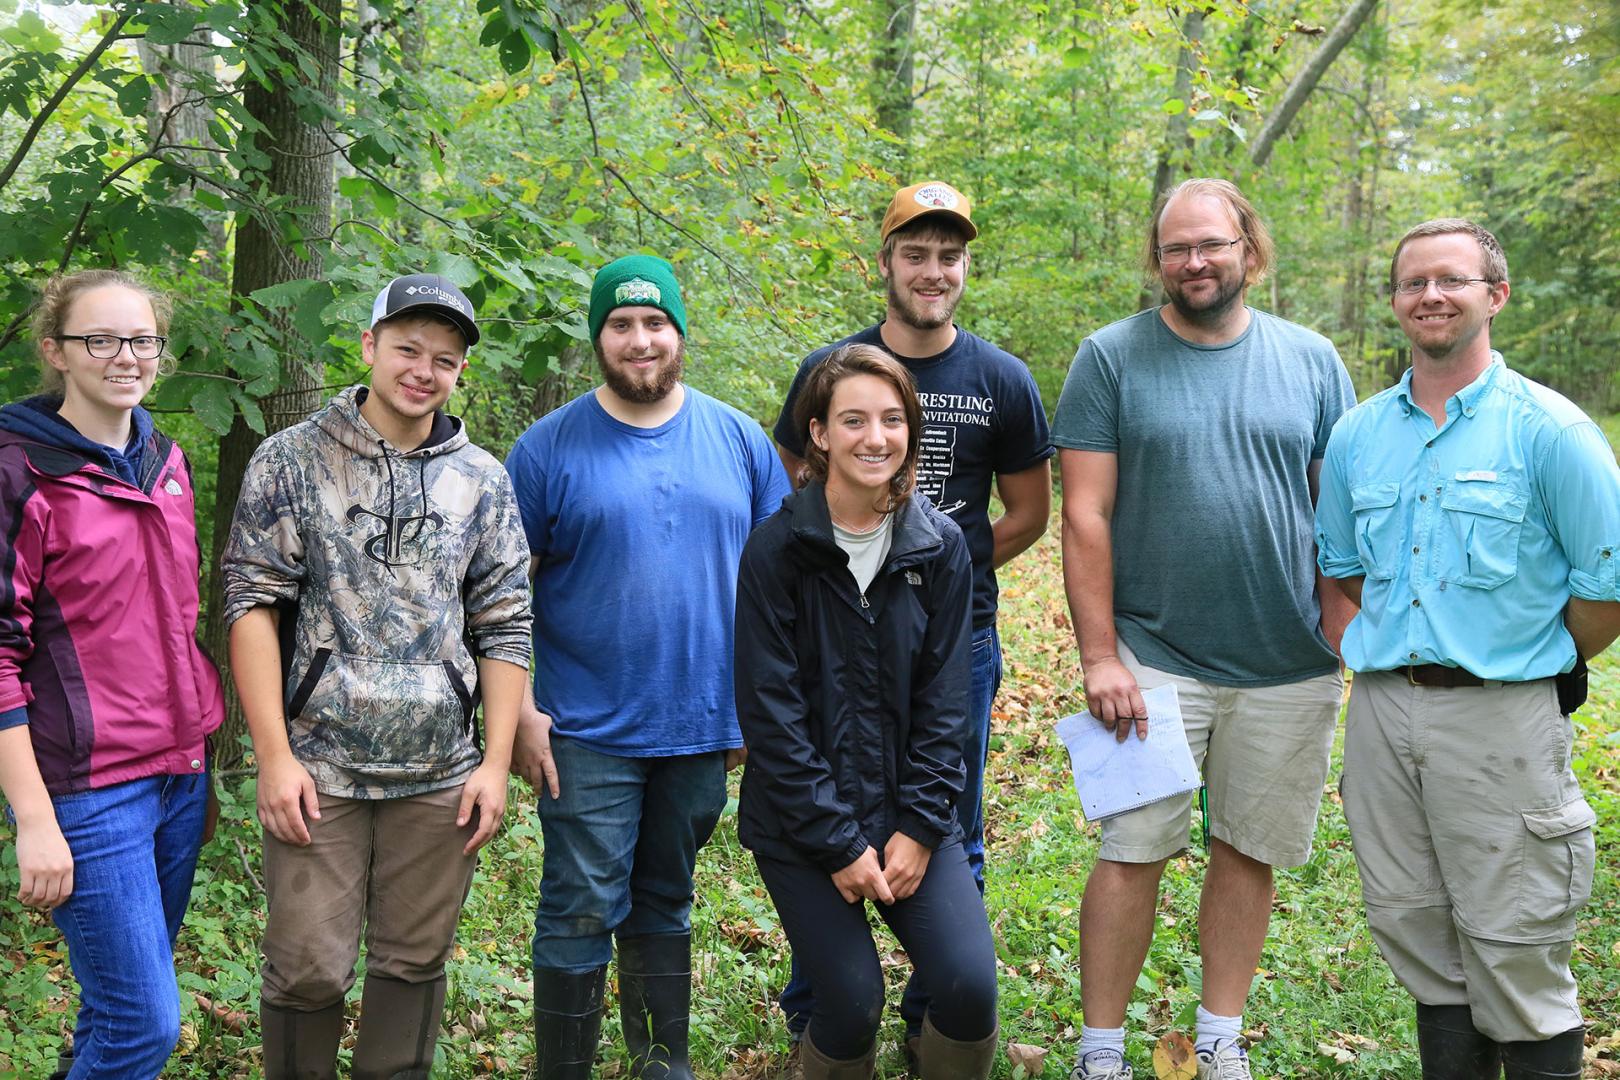 Pictured are Eric Diefenbacher and students in his fall 2018 Herpetology class, who were recently published in a scientific journal. From left: Emily Coscomb, Collin Sullivan, Talon Abrams, Kate Augustine, Sam Casler, Phil Keville, Eric Diefenbacher